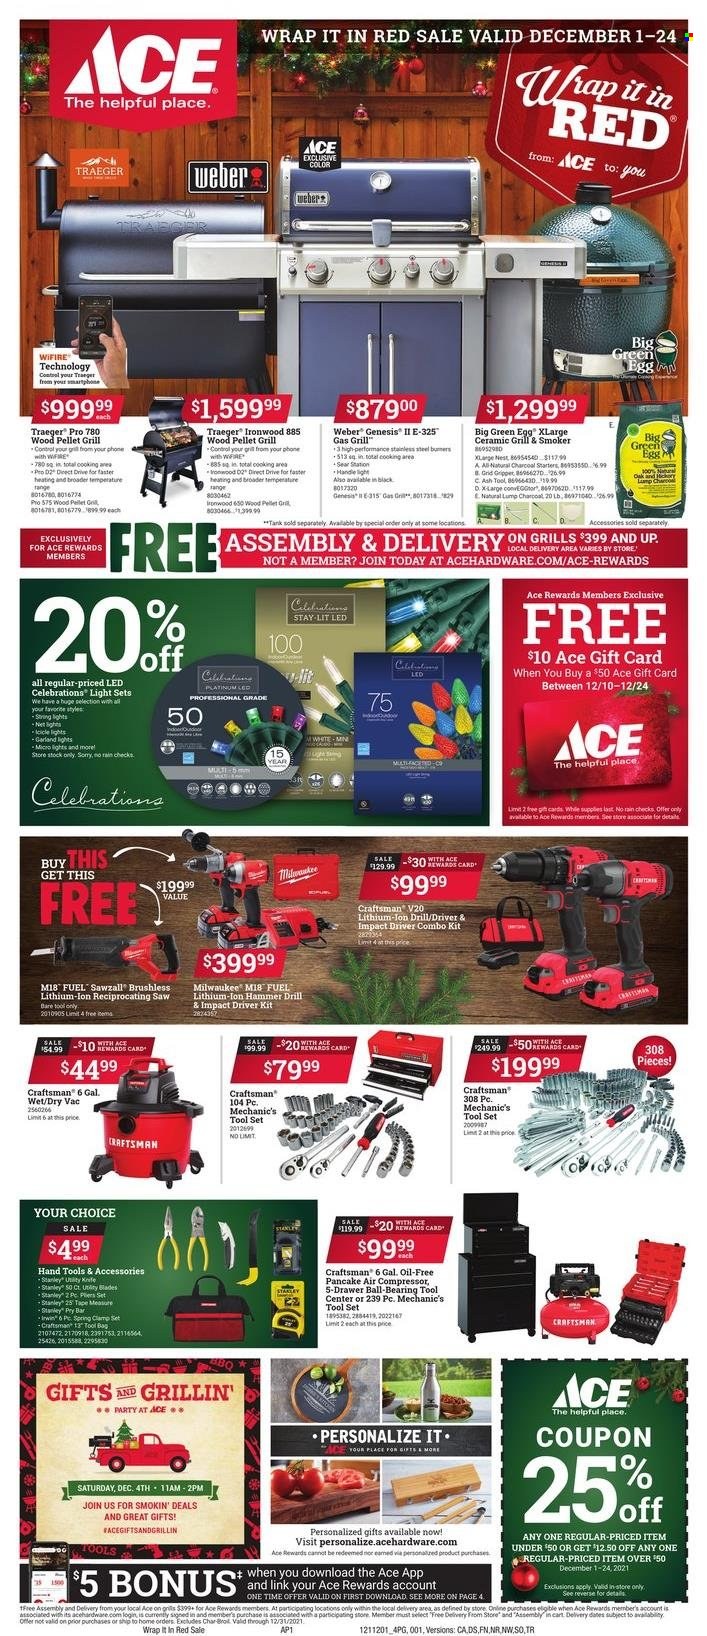 thumbnail - ACE Hardware Flyer - 12/01/2021 - 12/24/2021 - Sales products - tools & accessories, Celebration, pancakes, bag, knife, vacuum cleaner, garland lights, garland, light set, Stanley, Milwaukee, impact driver, Craftsman, saw, reciprocating saw, pliers, pry bar, combo kit, tool set, hand tools, air compressor, measuring tape, mechanic's tools, clamp set, tool bag, gas grill, grill, Weber, pellet grill, smoker. Page 1.